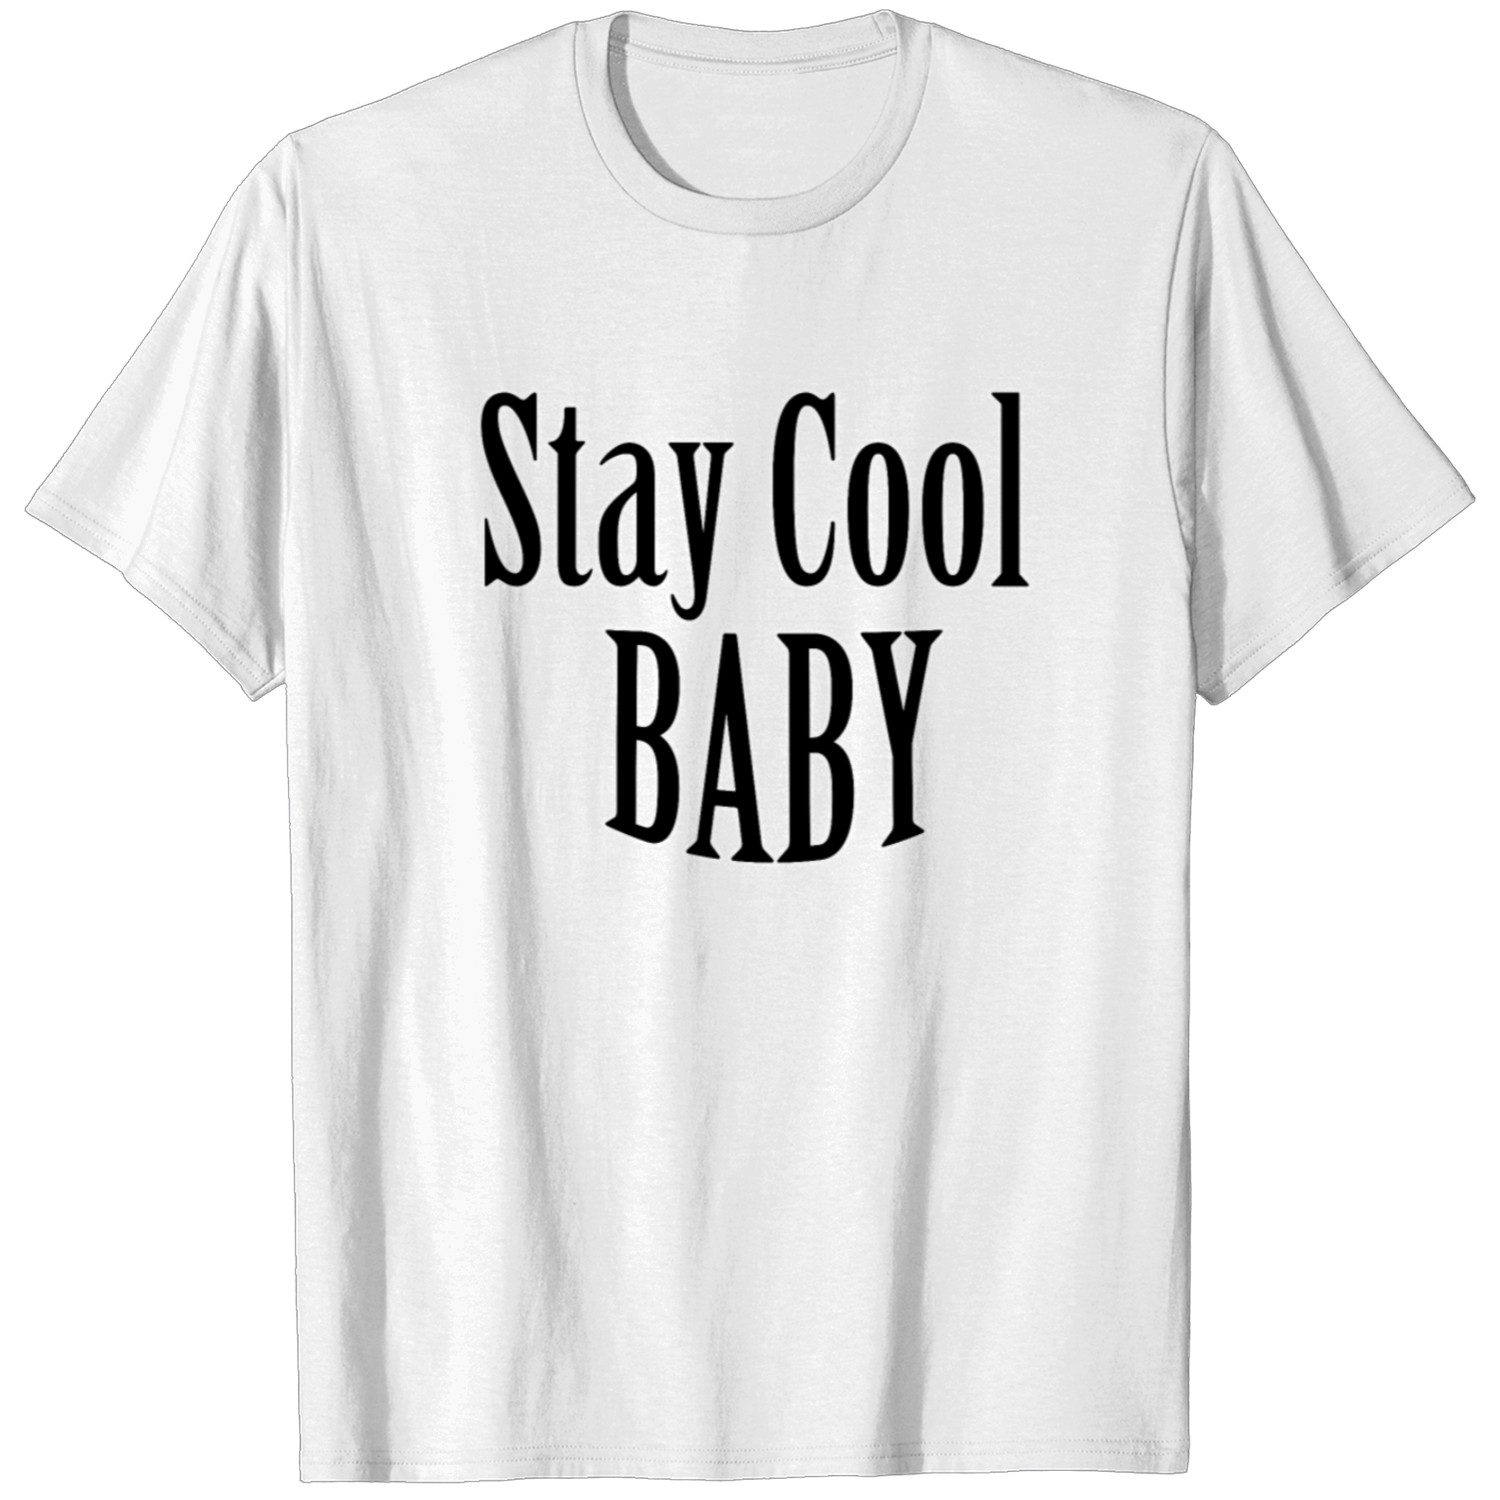 Stay cool baby T-shirt